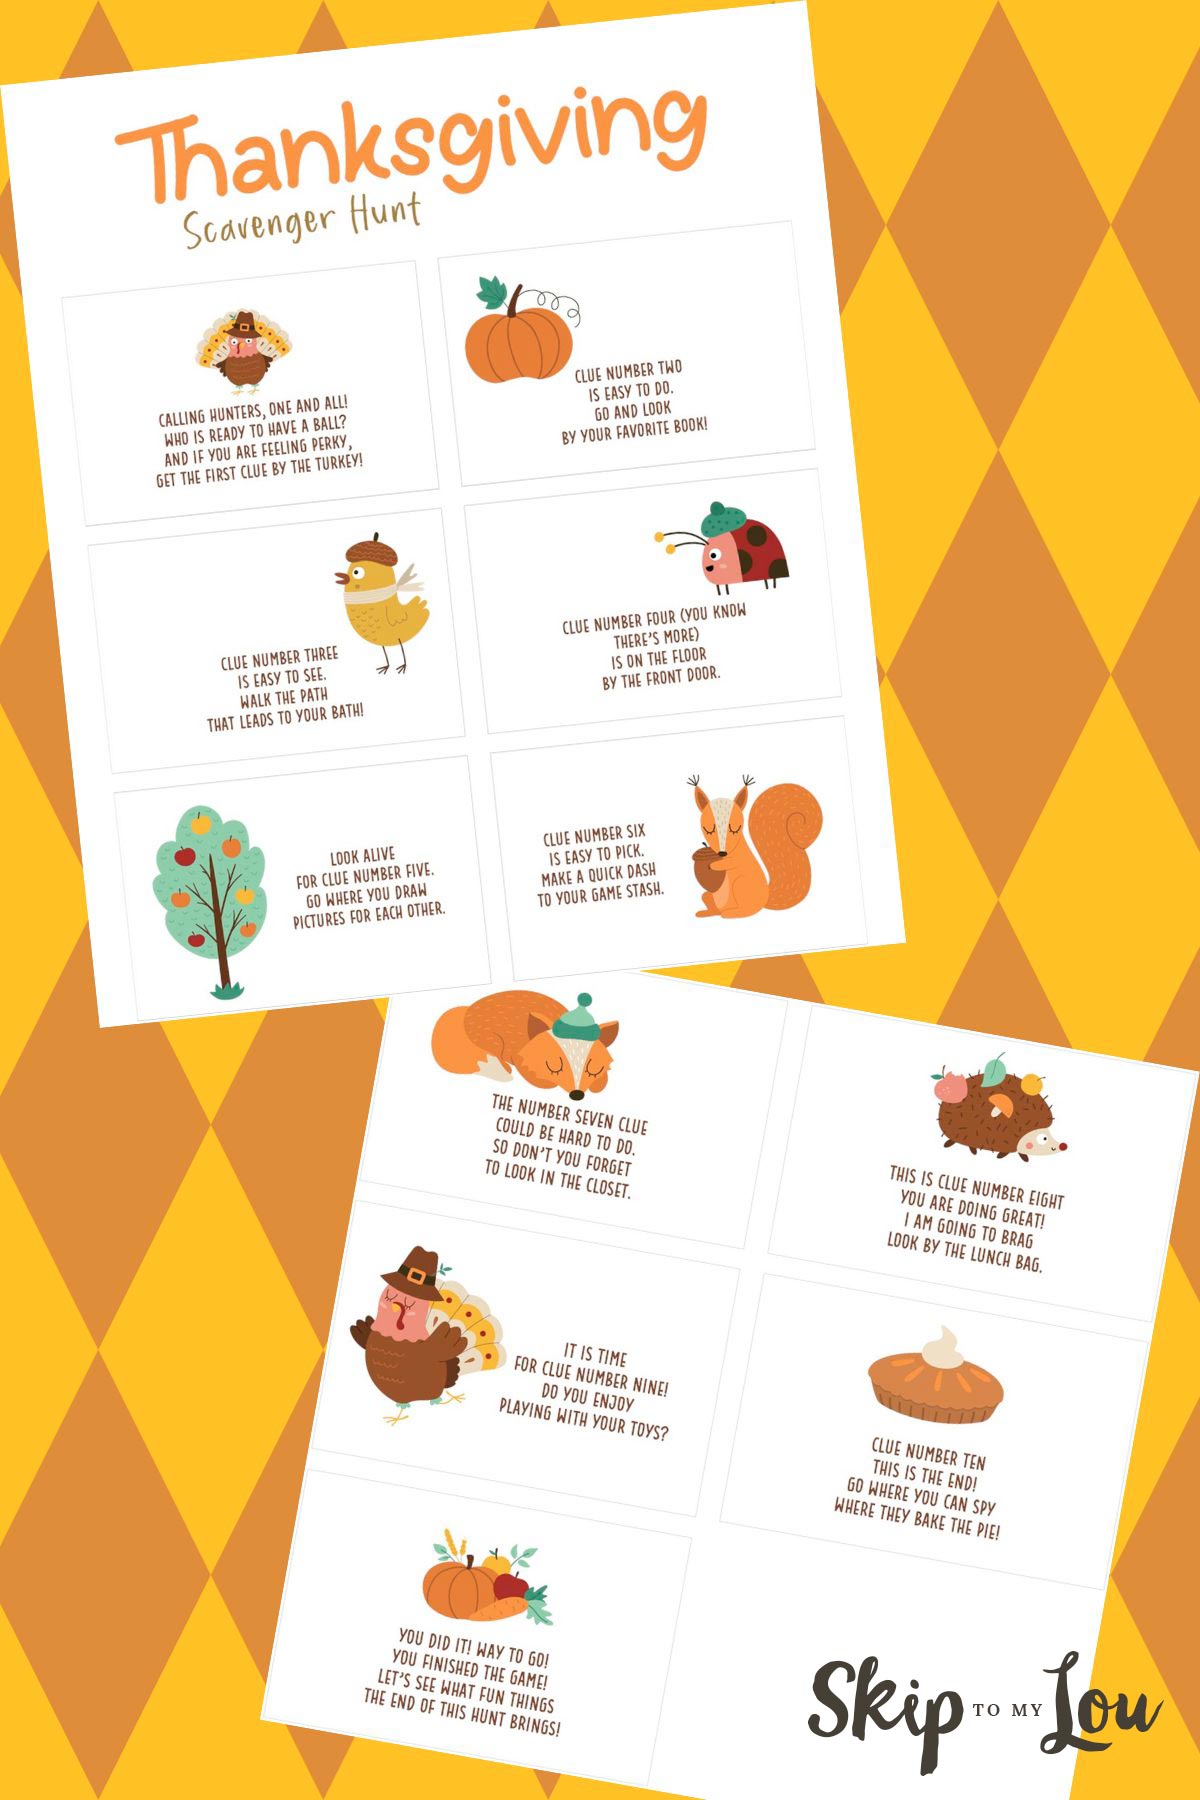 Printable thanksgiving scavenger hunt with clues on top of a yellow and brown background.